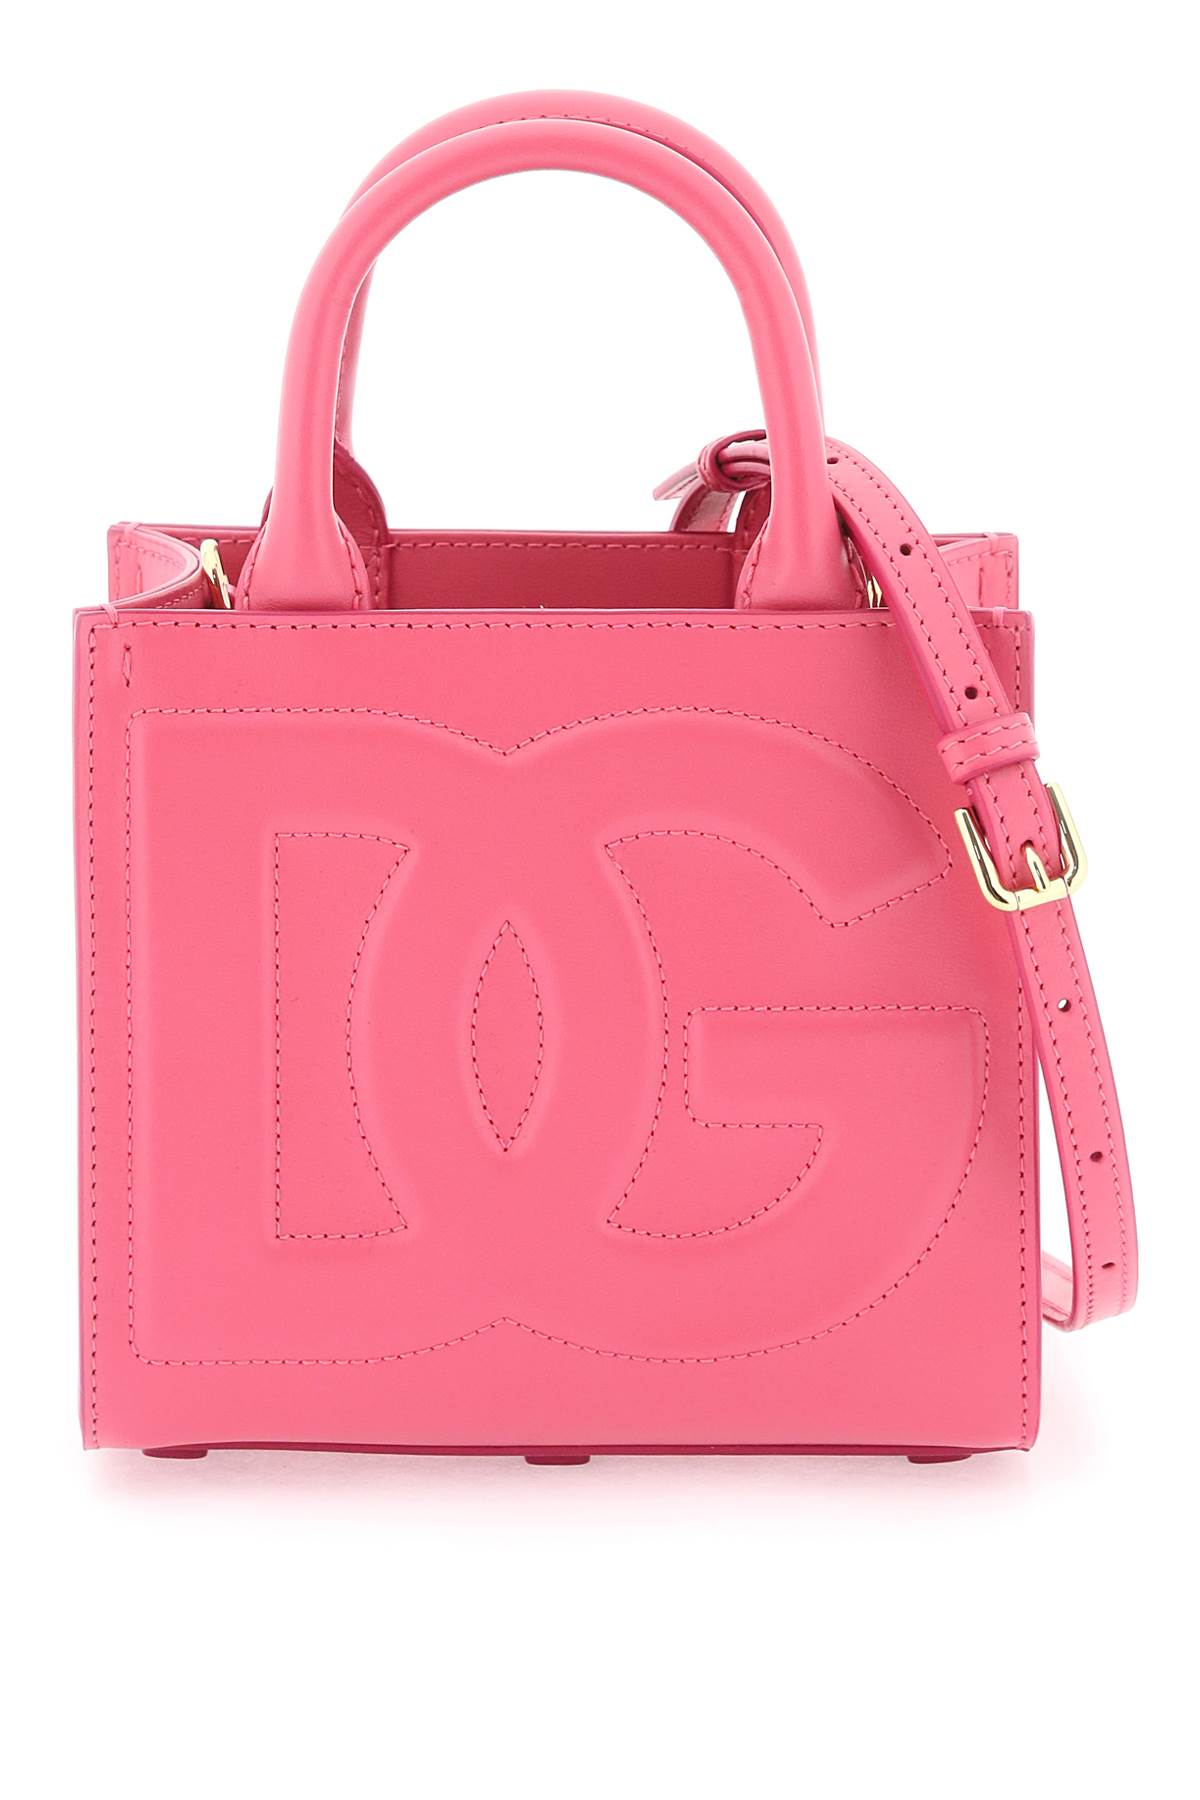 Dolce & Gabbana Dg Daily Small Tote Bag In Burgundy